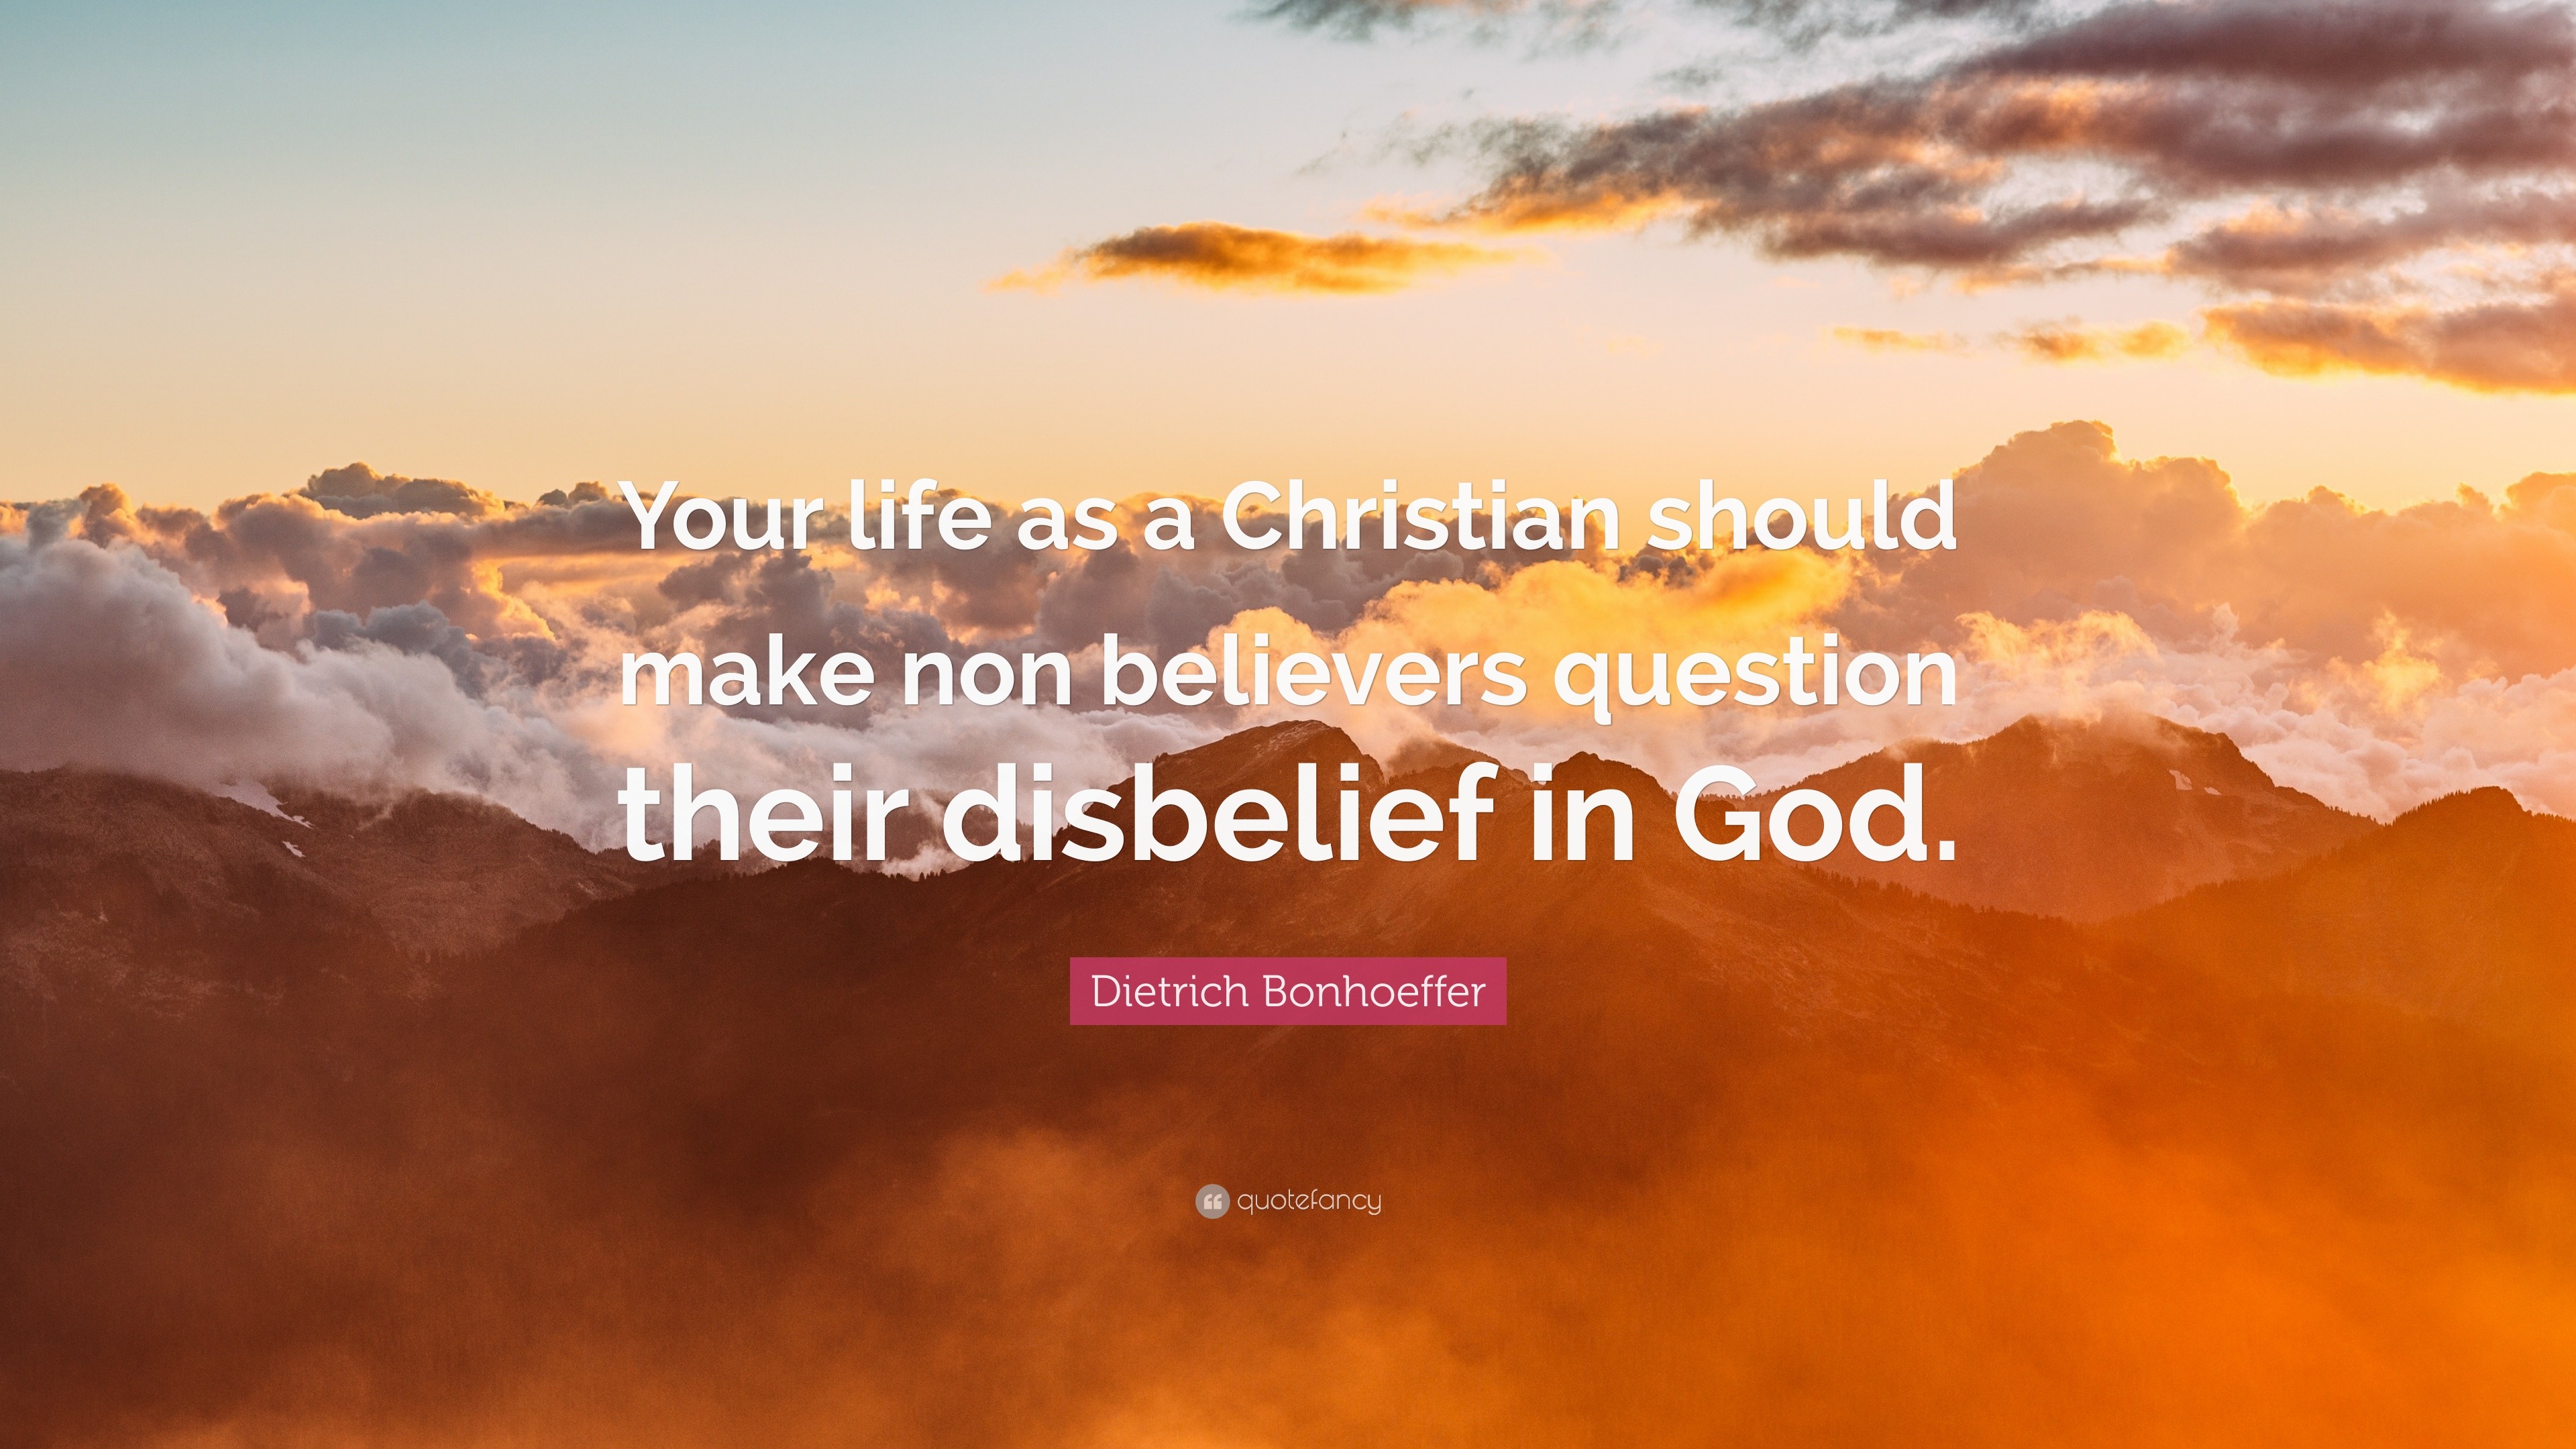 Christian Quotes - Your life as a Christian should make non-Christians question their disbelief.